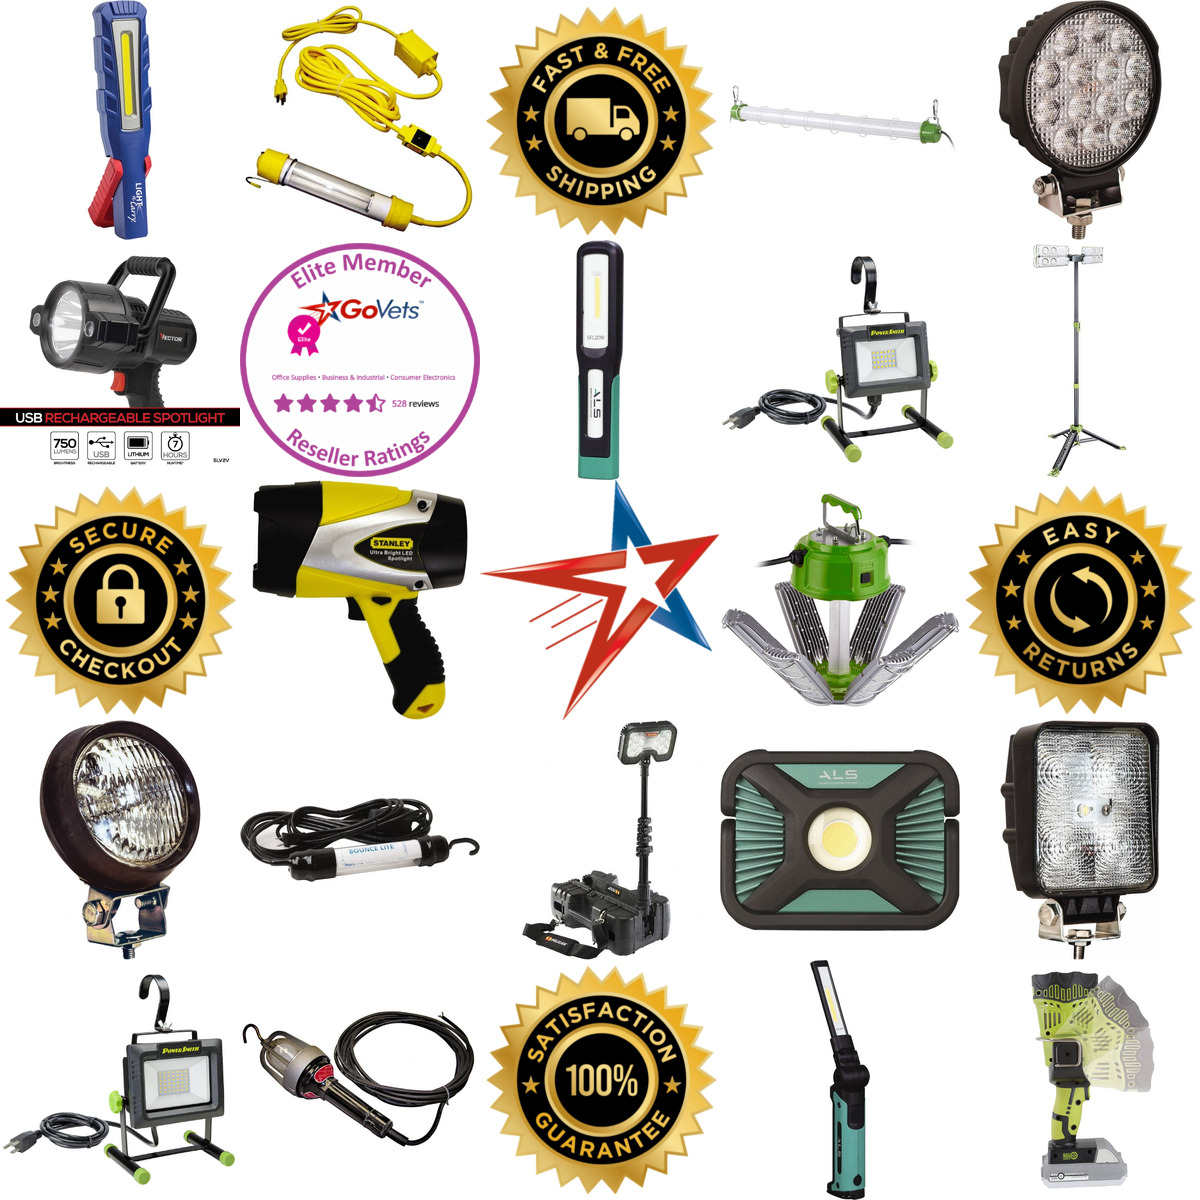 A selection of Garage Lighting products on GoVets